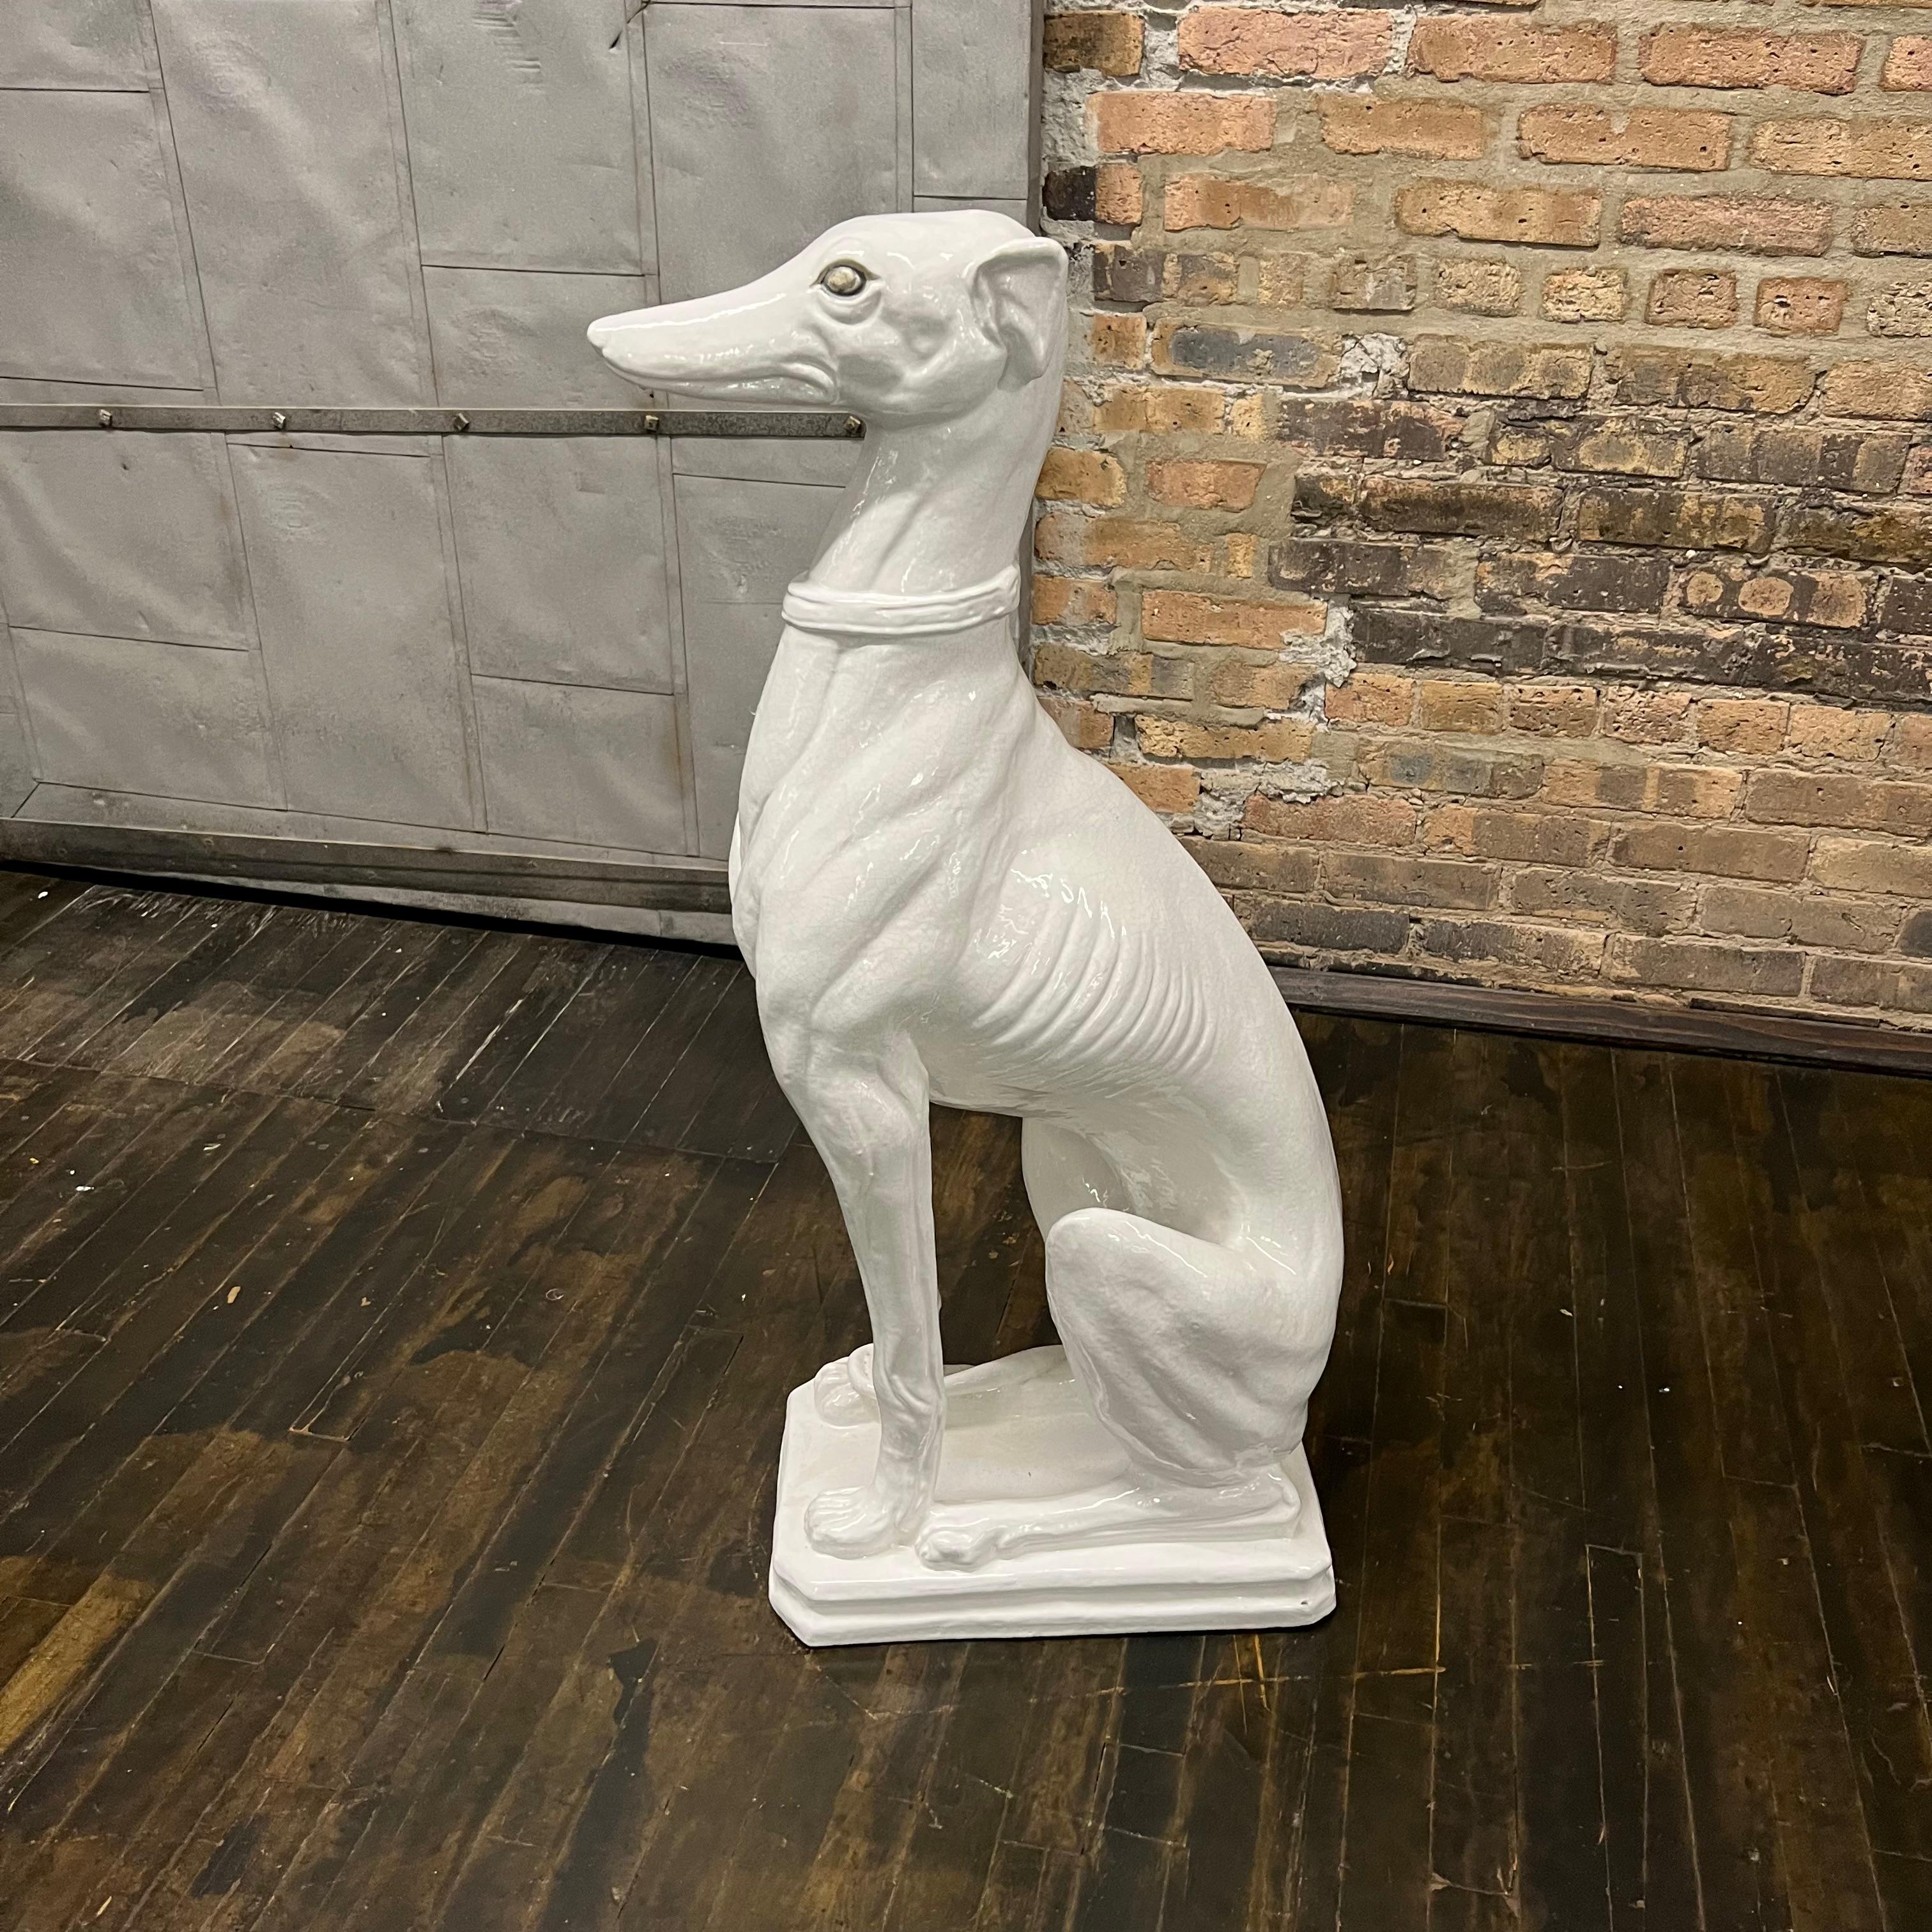 This vintage Italian midcentury white porcelain sculpture, artfully depicts an obedient greyhound dog. The greyhound, known for its slender, streamlined body and swift agility, is portrayed sitting and displaying a calm and submissive demeanor (his